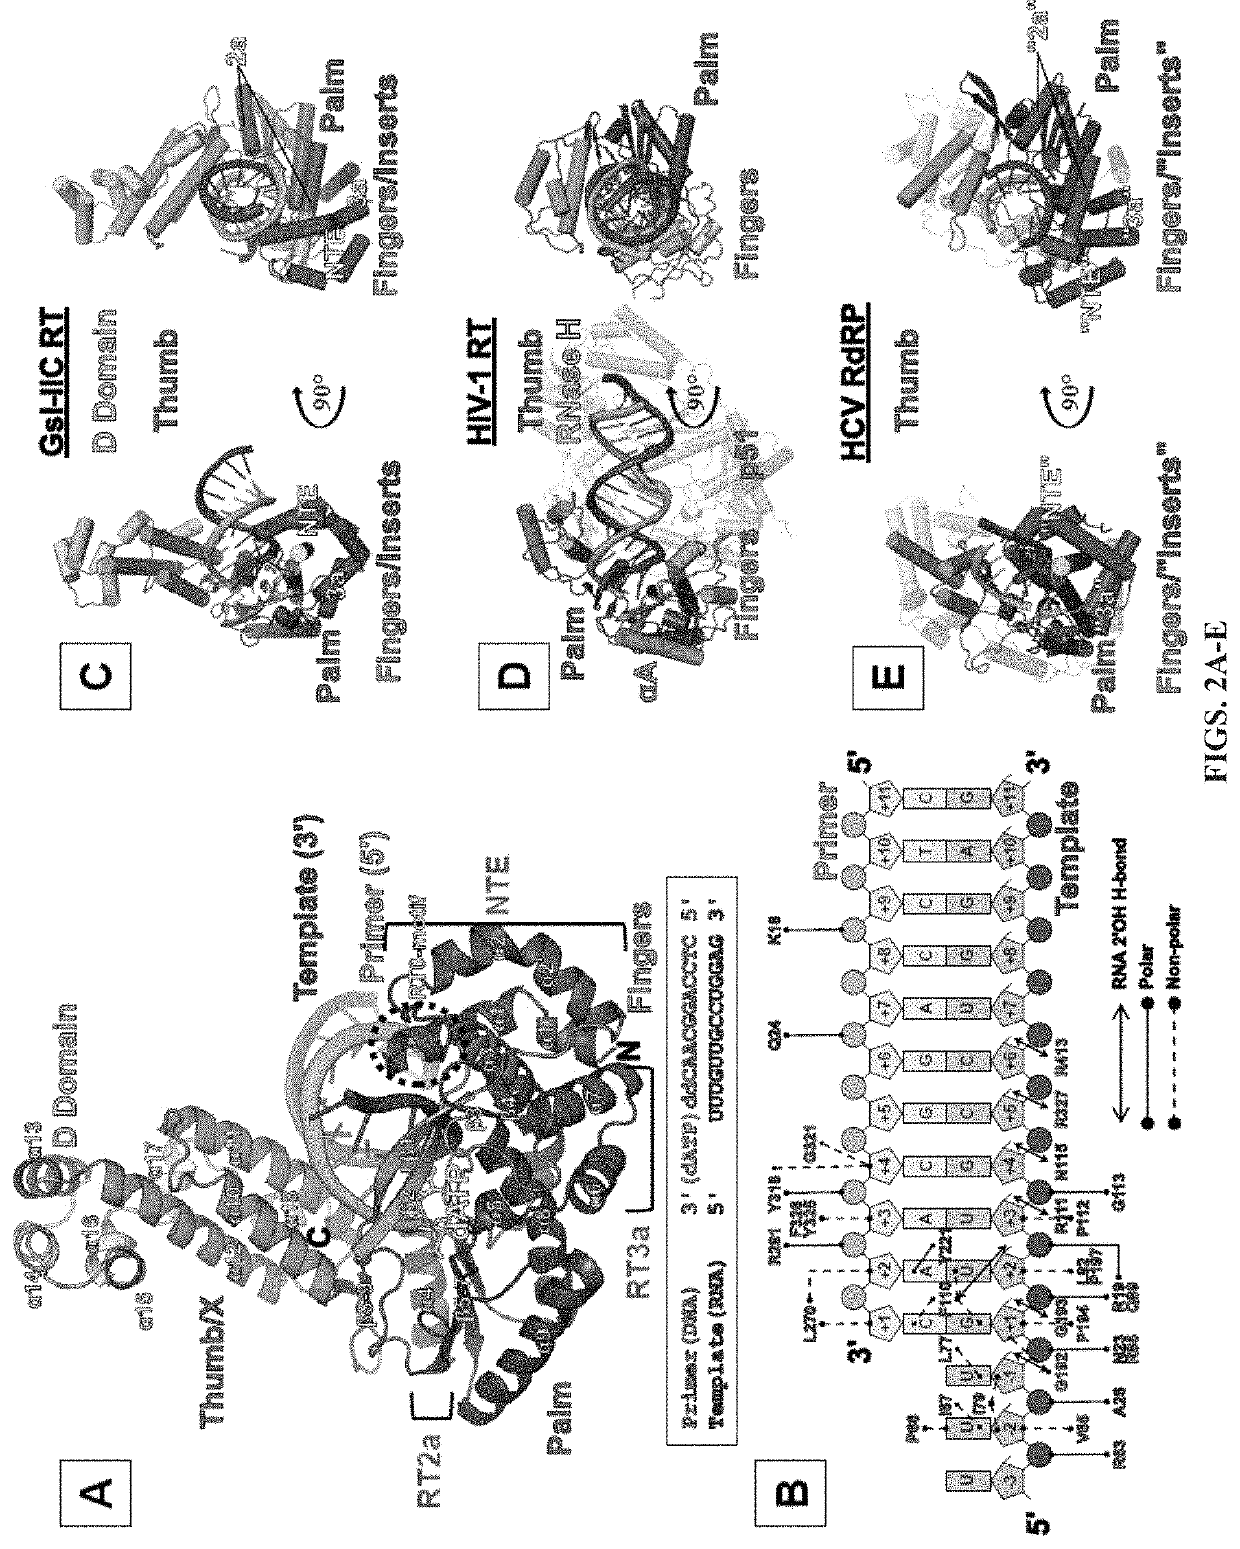 Non-LTR-retroelement reverse transcriptase and uses thereof